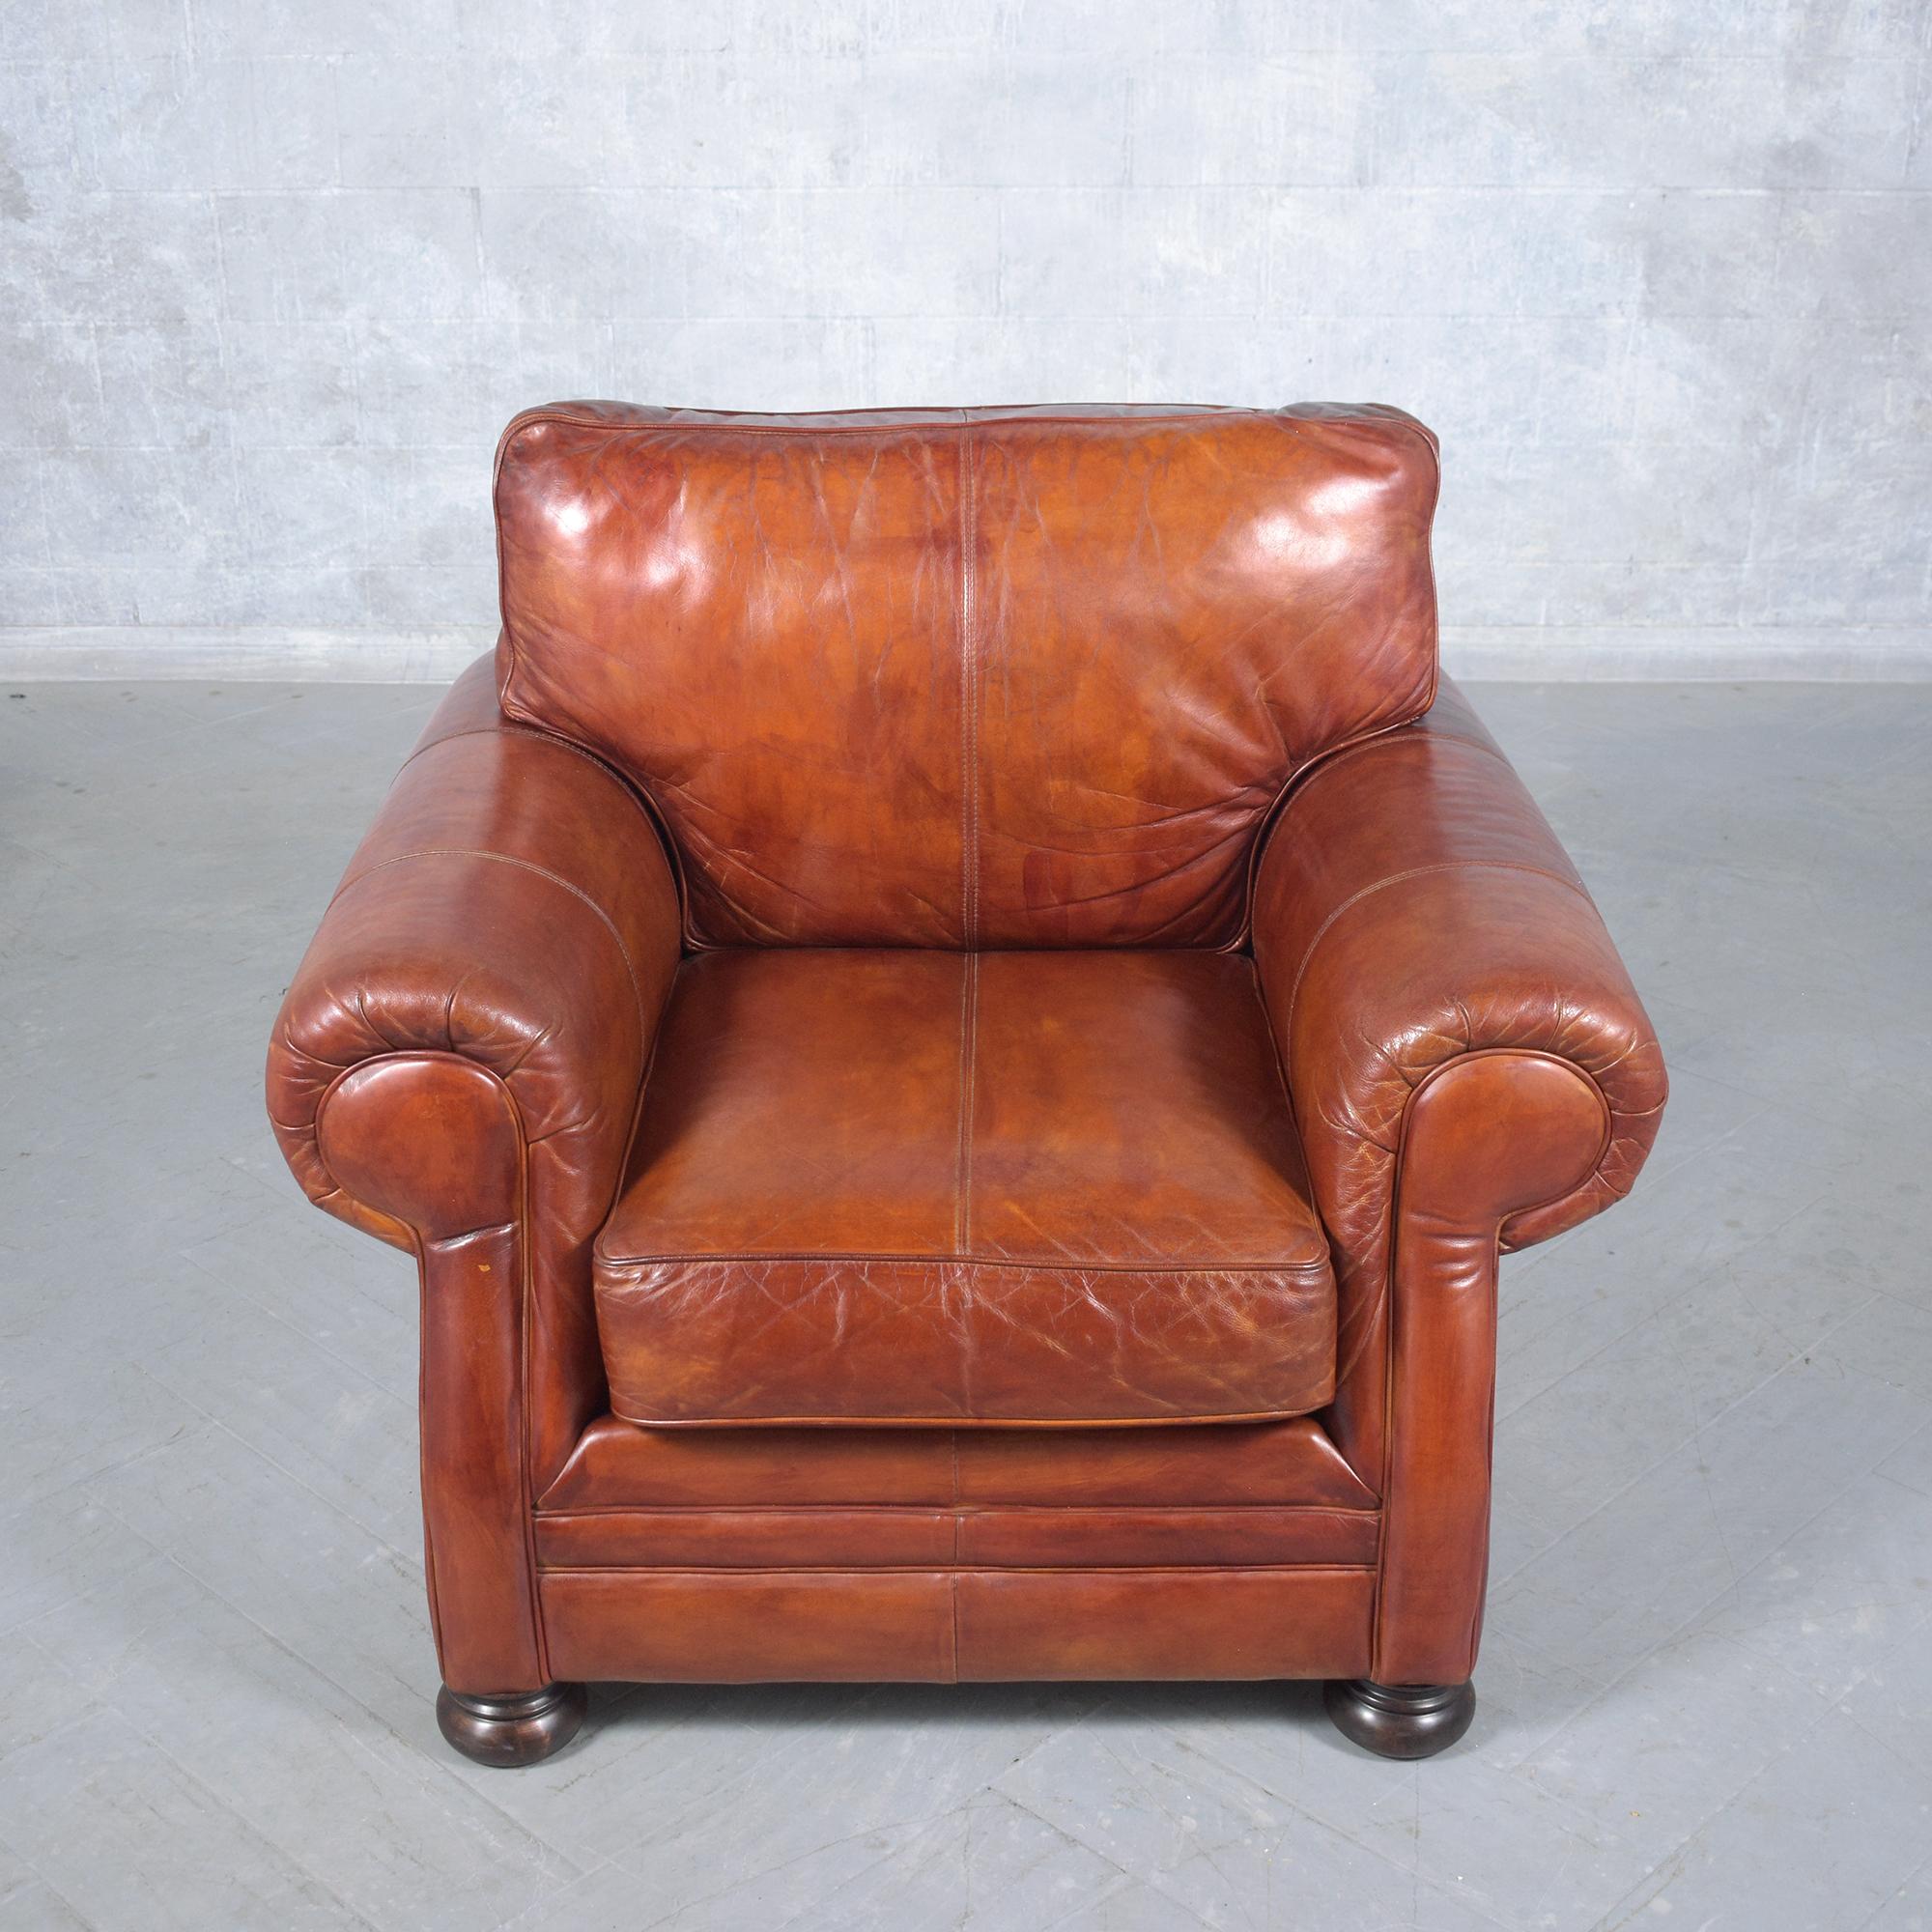 American Restored Vintage Leather Armchairs in Cognac Brown with Carved Bun Legs For Sale